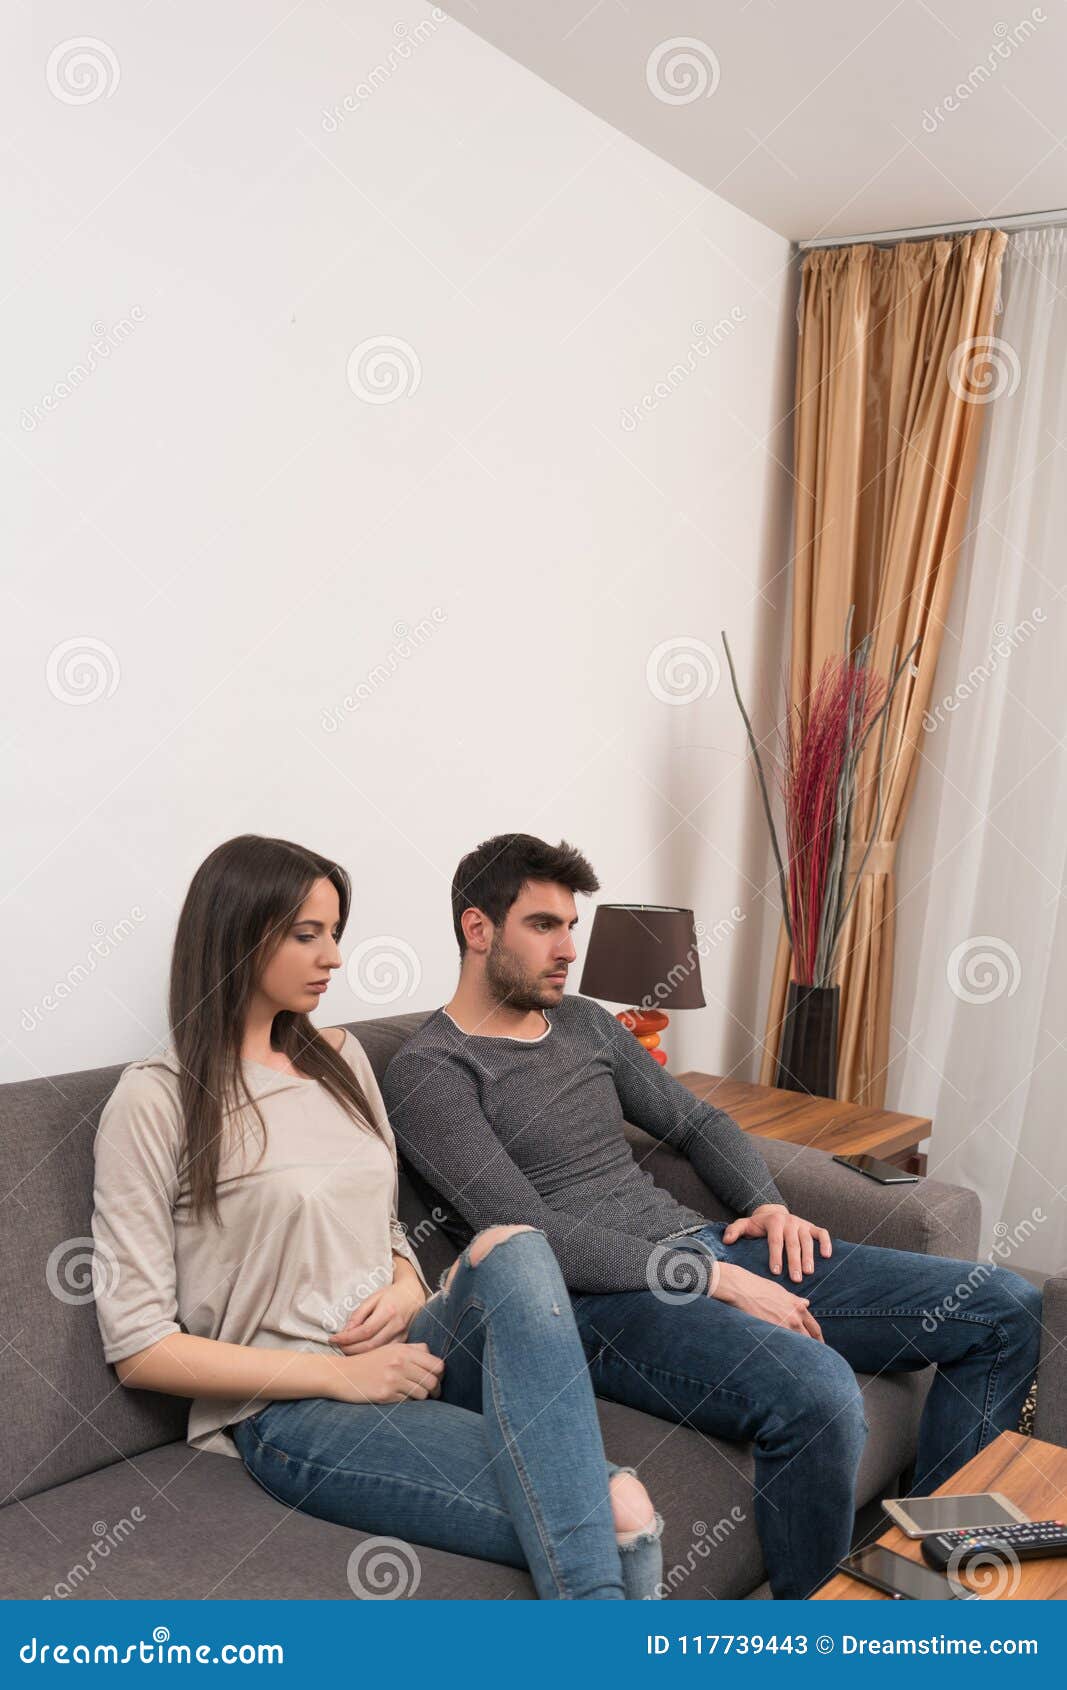 bored young couple sitting on couch.